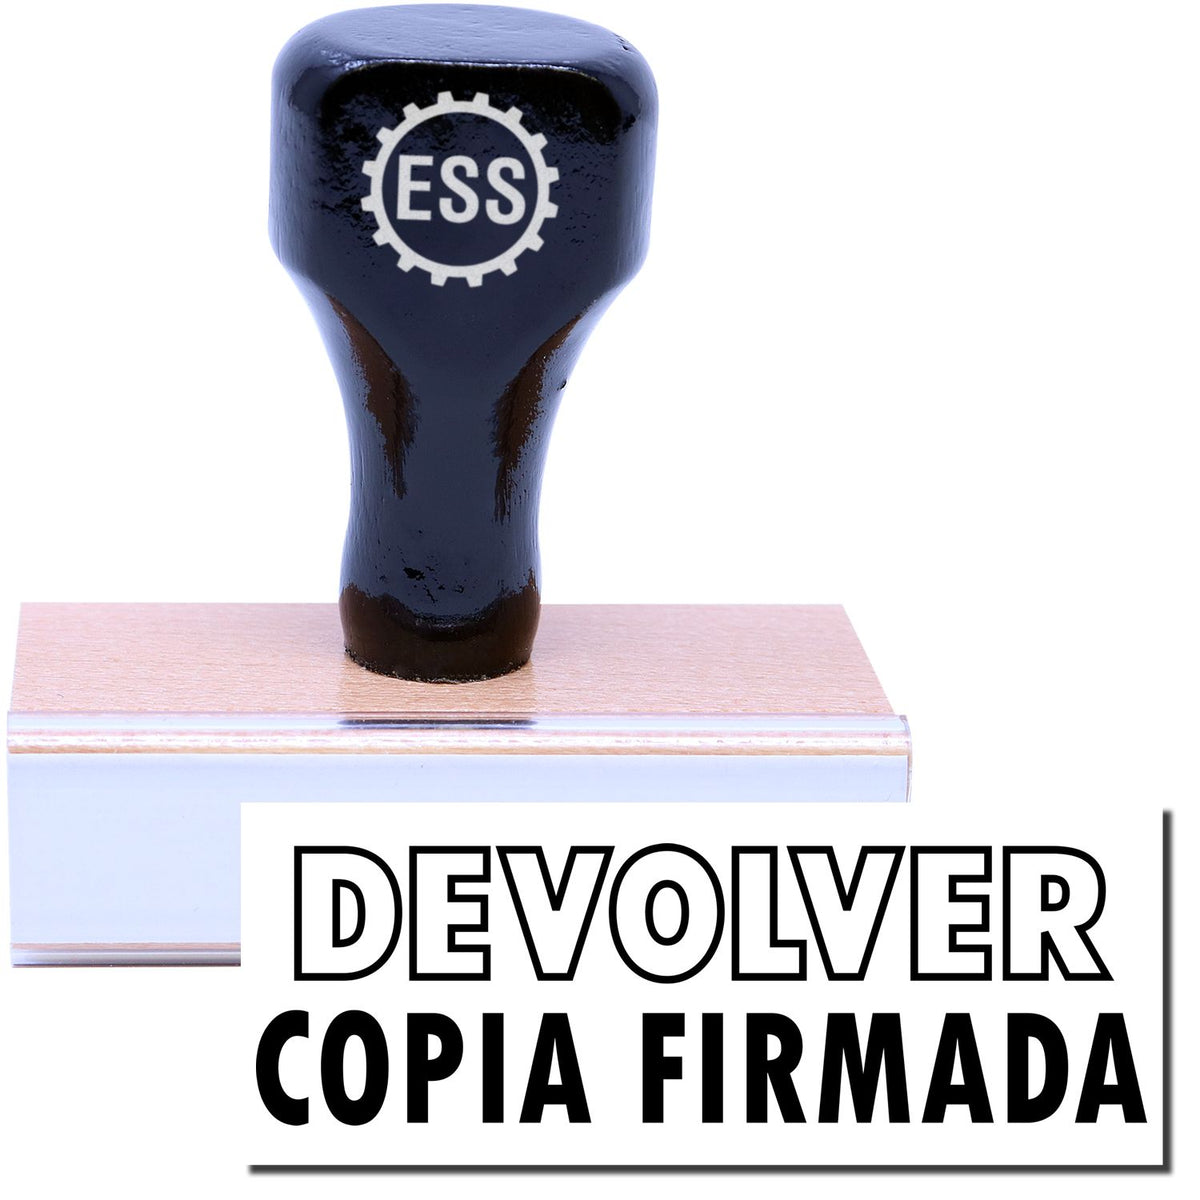 A stock office rubber stamp with a stamped image showing how the text &quot;DEVOLVER COPIA FIRMADA&quot; (&quot;DEVOLVER&quot; in an outline font) in a large font is displayed after stamping.